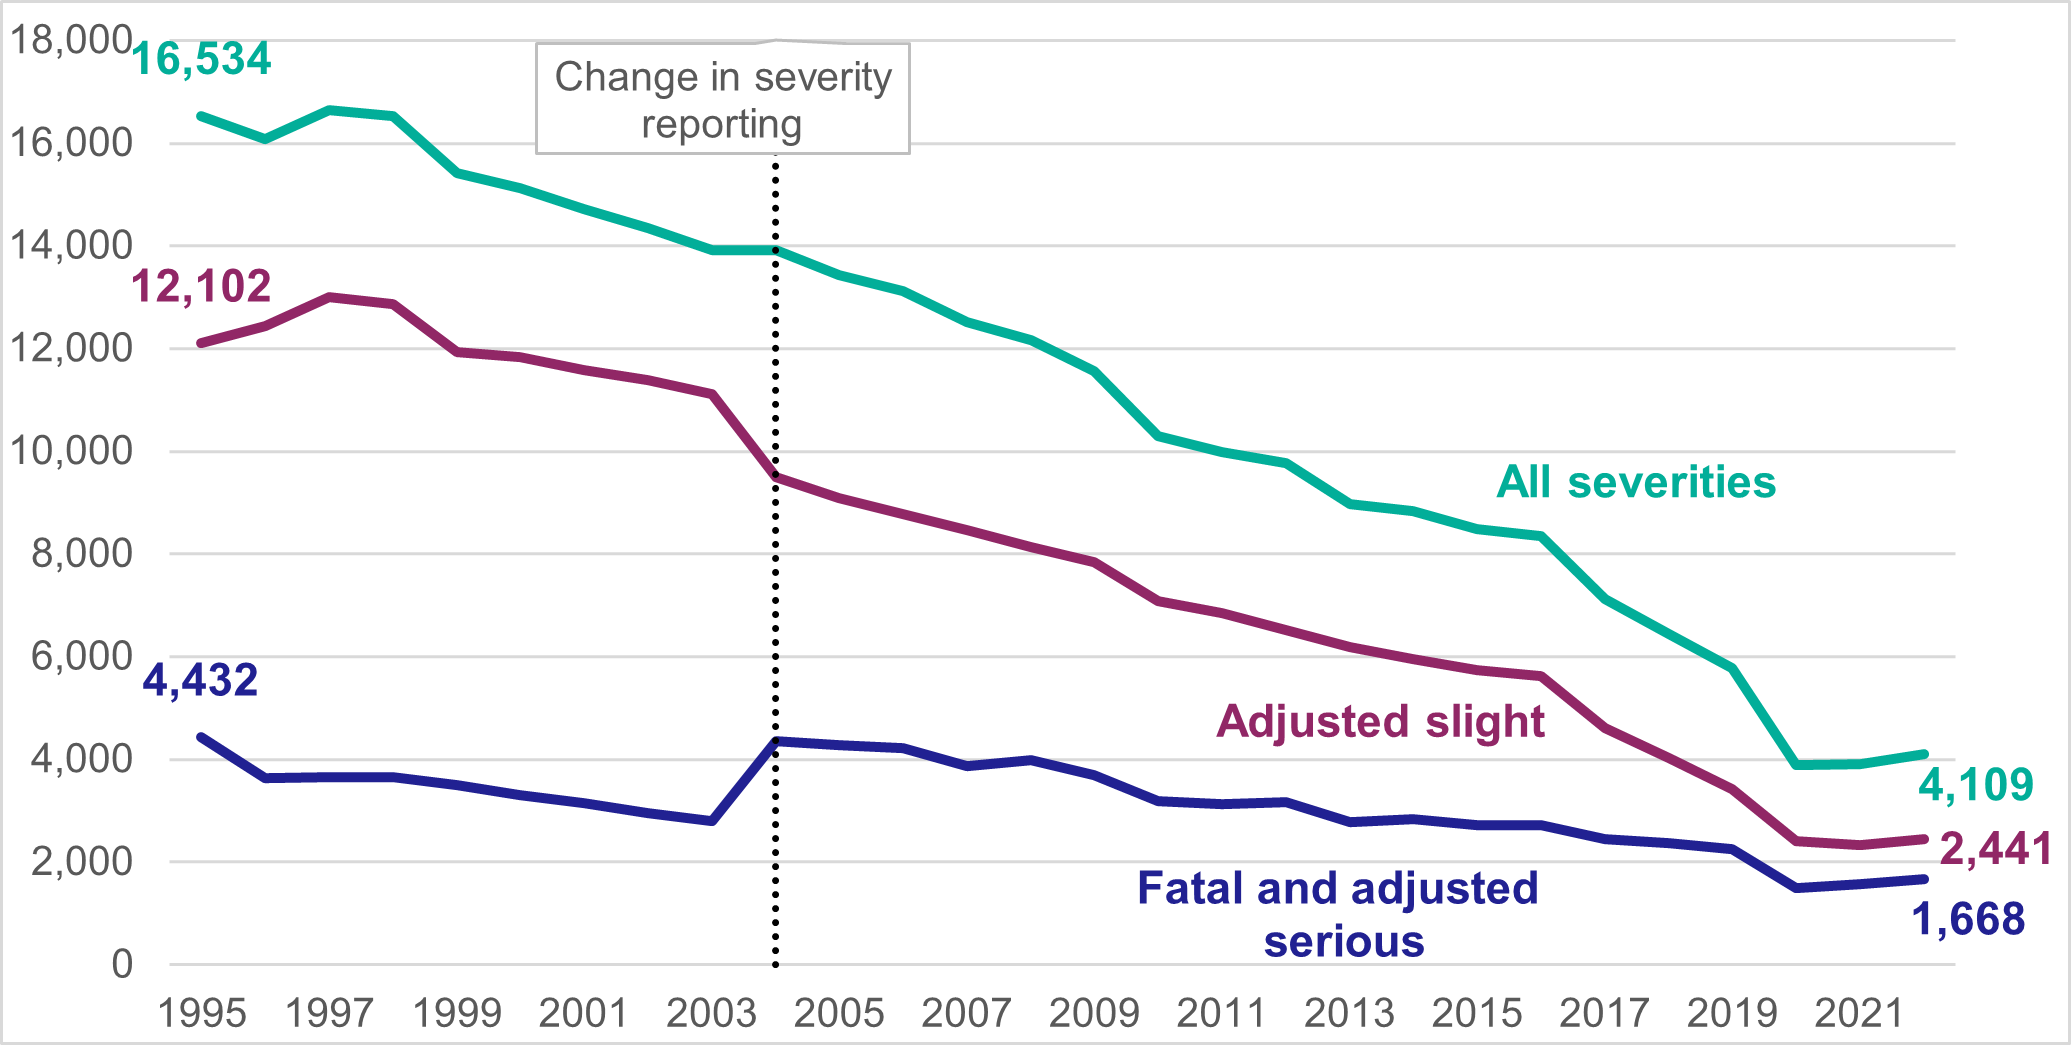 Figure 1: Number of reported injury road collisions broken down by severity, 1999 – 2022 - as described in text above